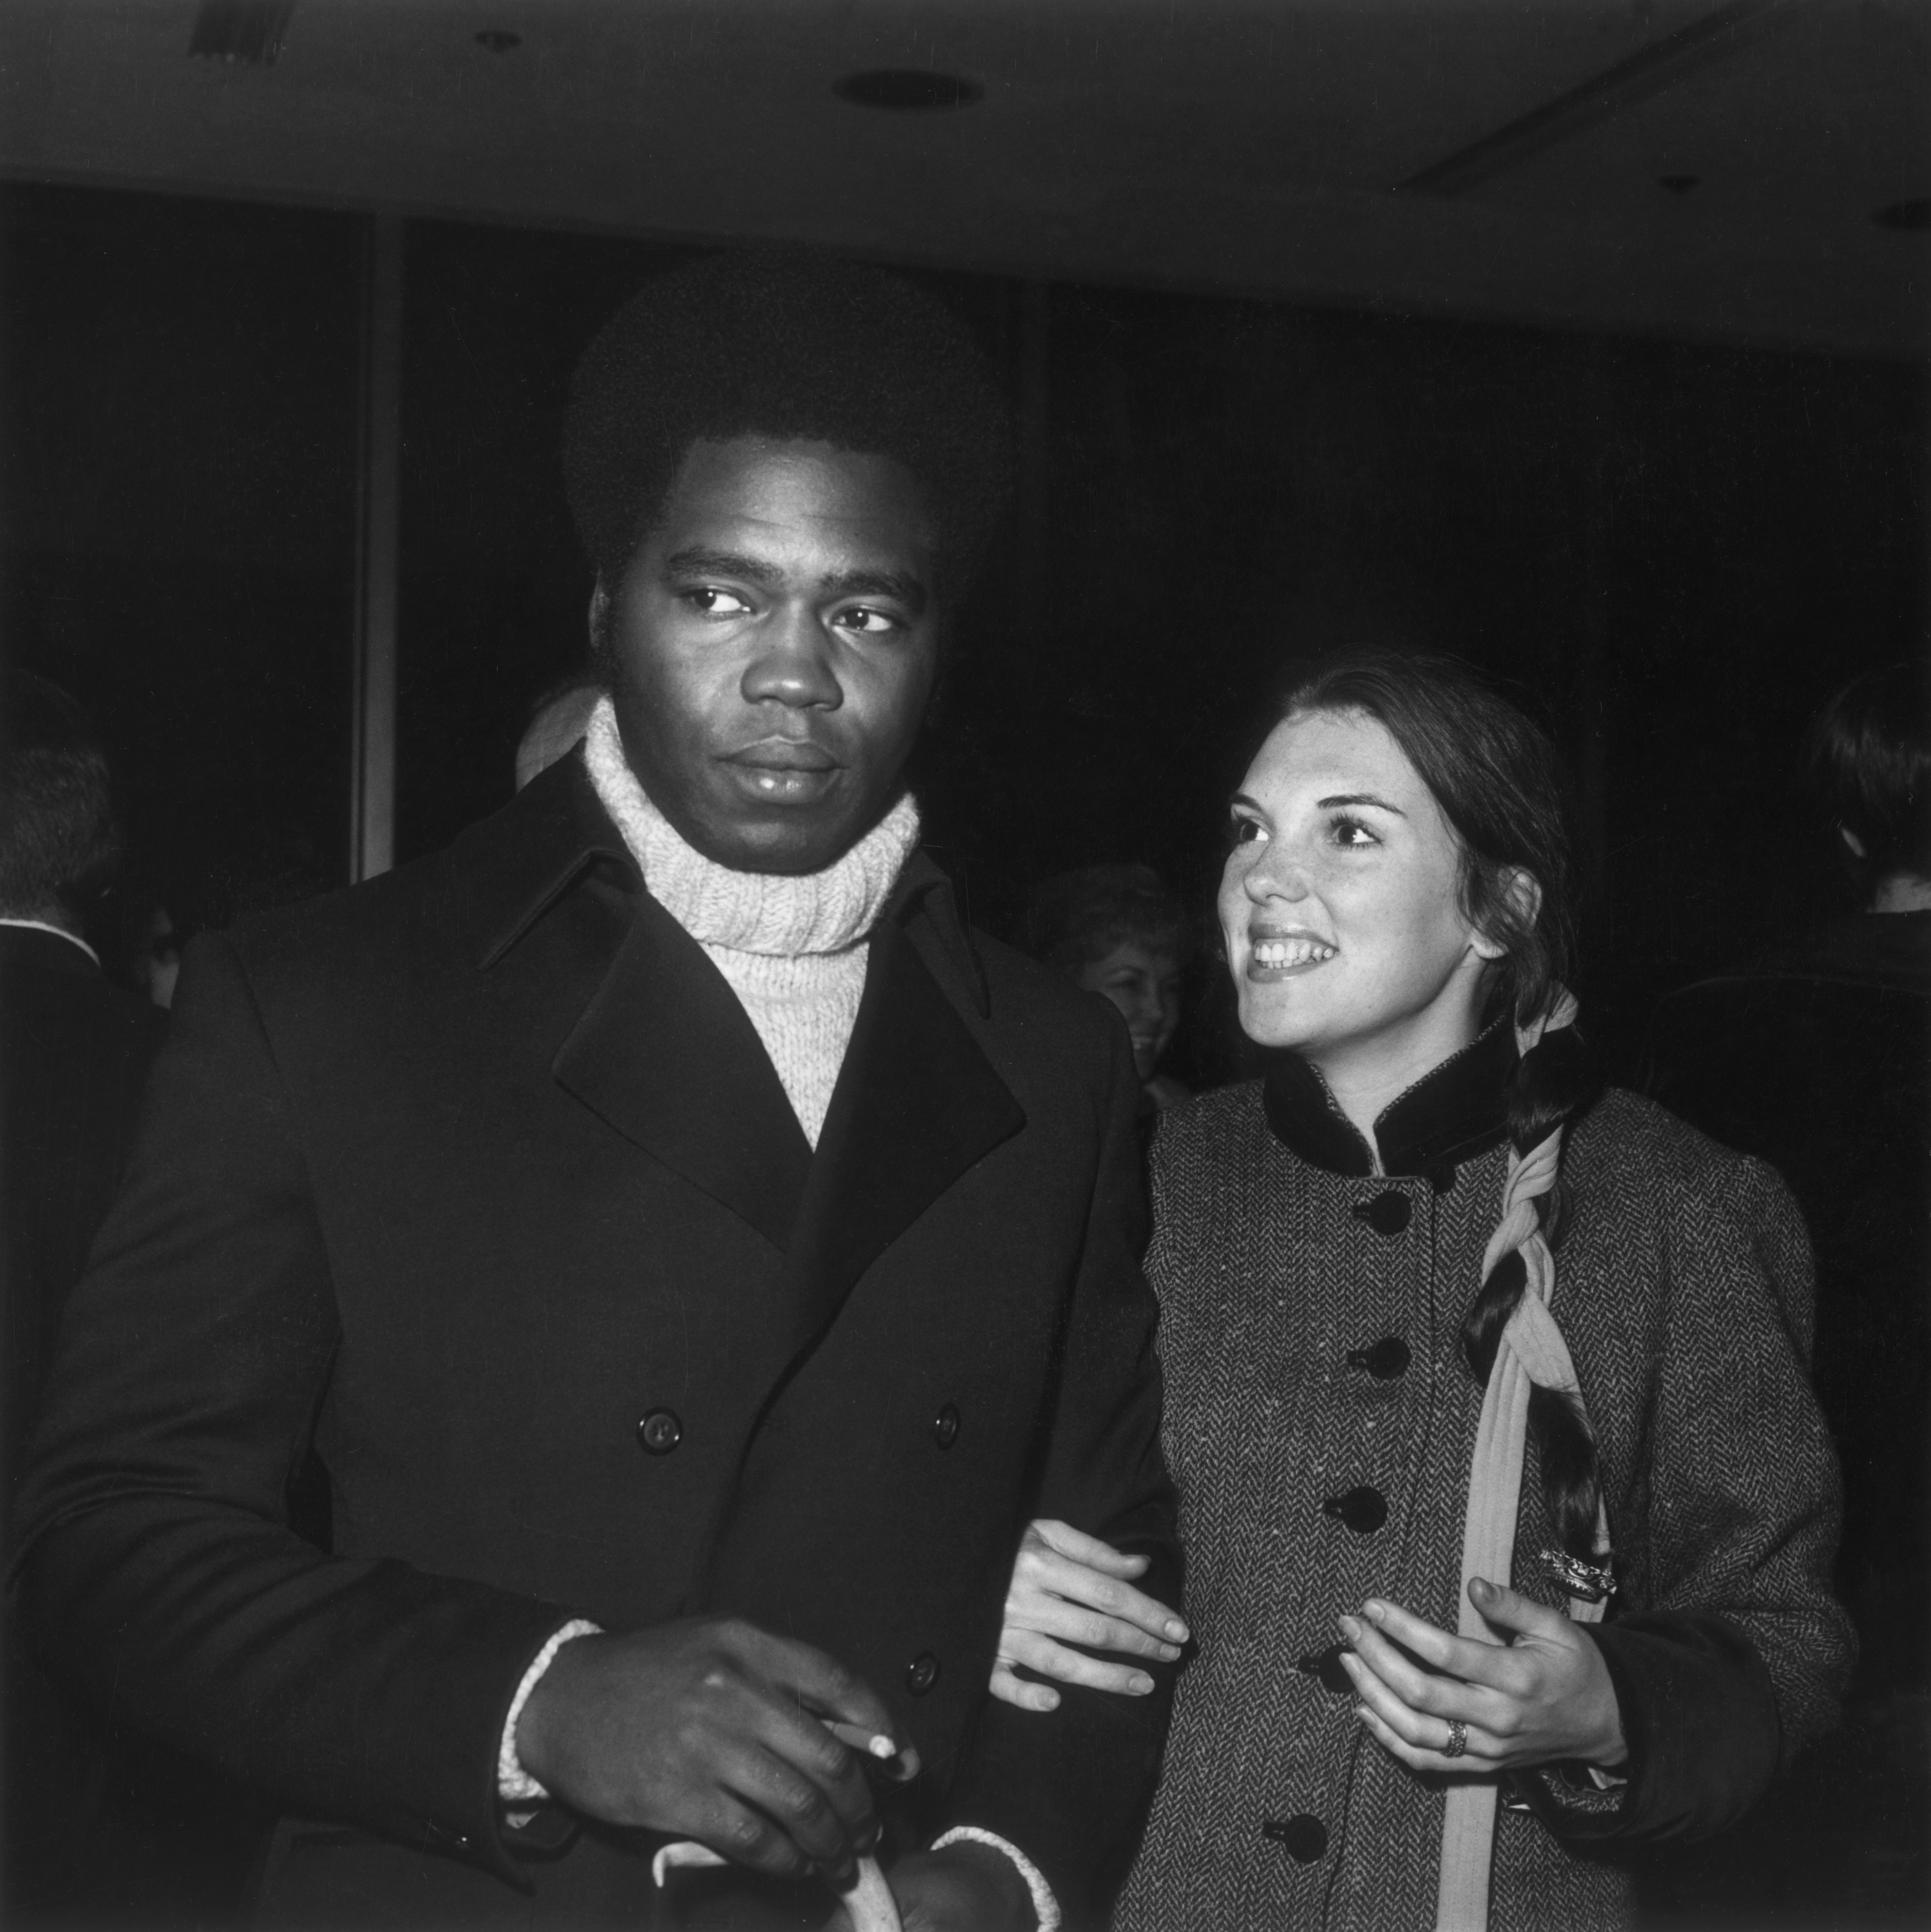 Georg Stanford Brown and his wife Tyne Daly at the British National Theatre, London England. Circa 1975 | Source: Getty Images